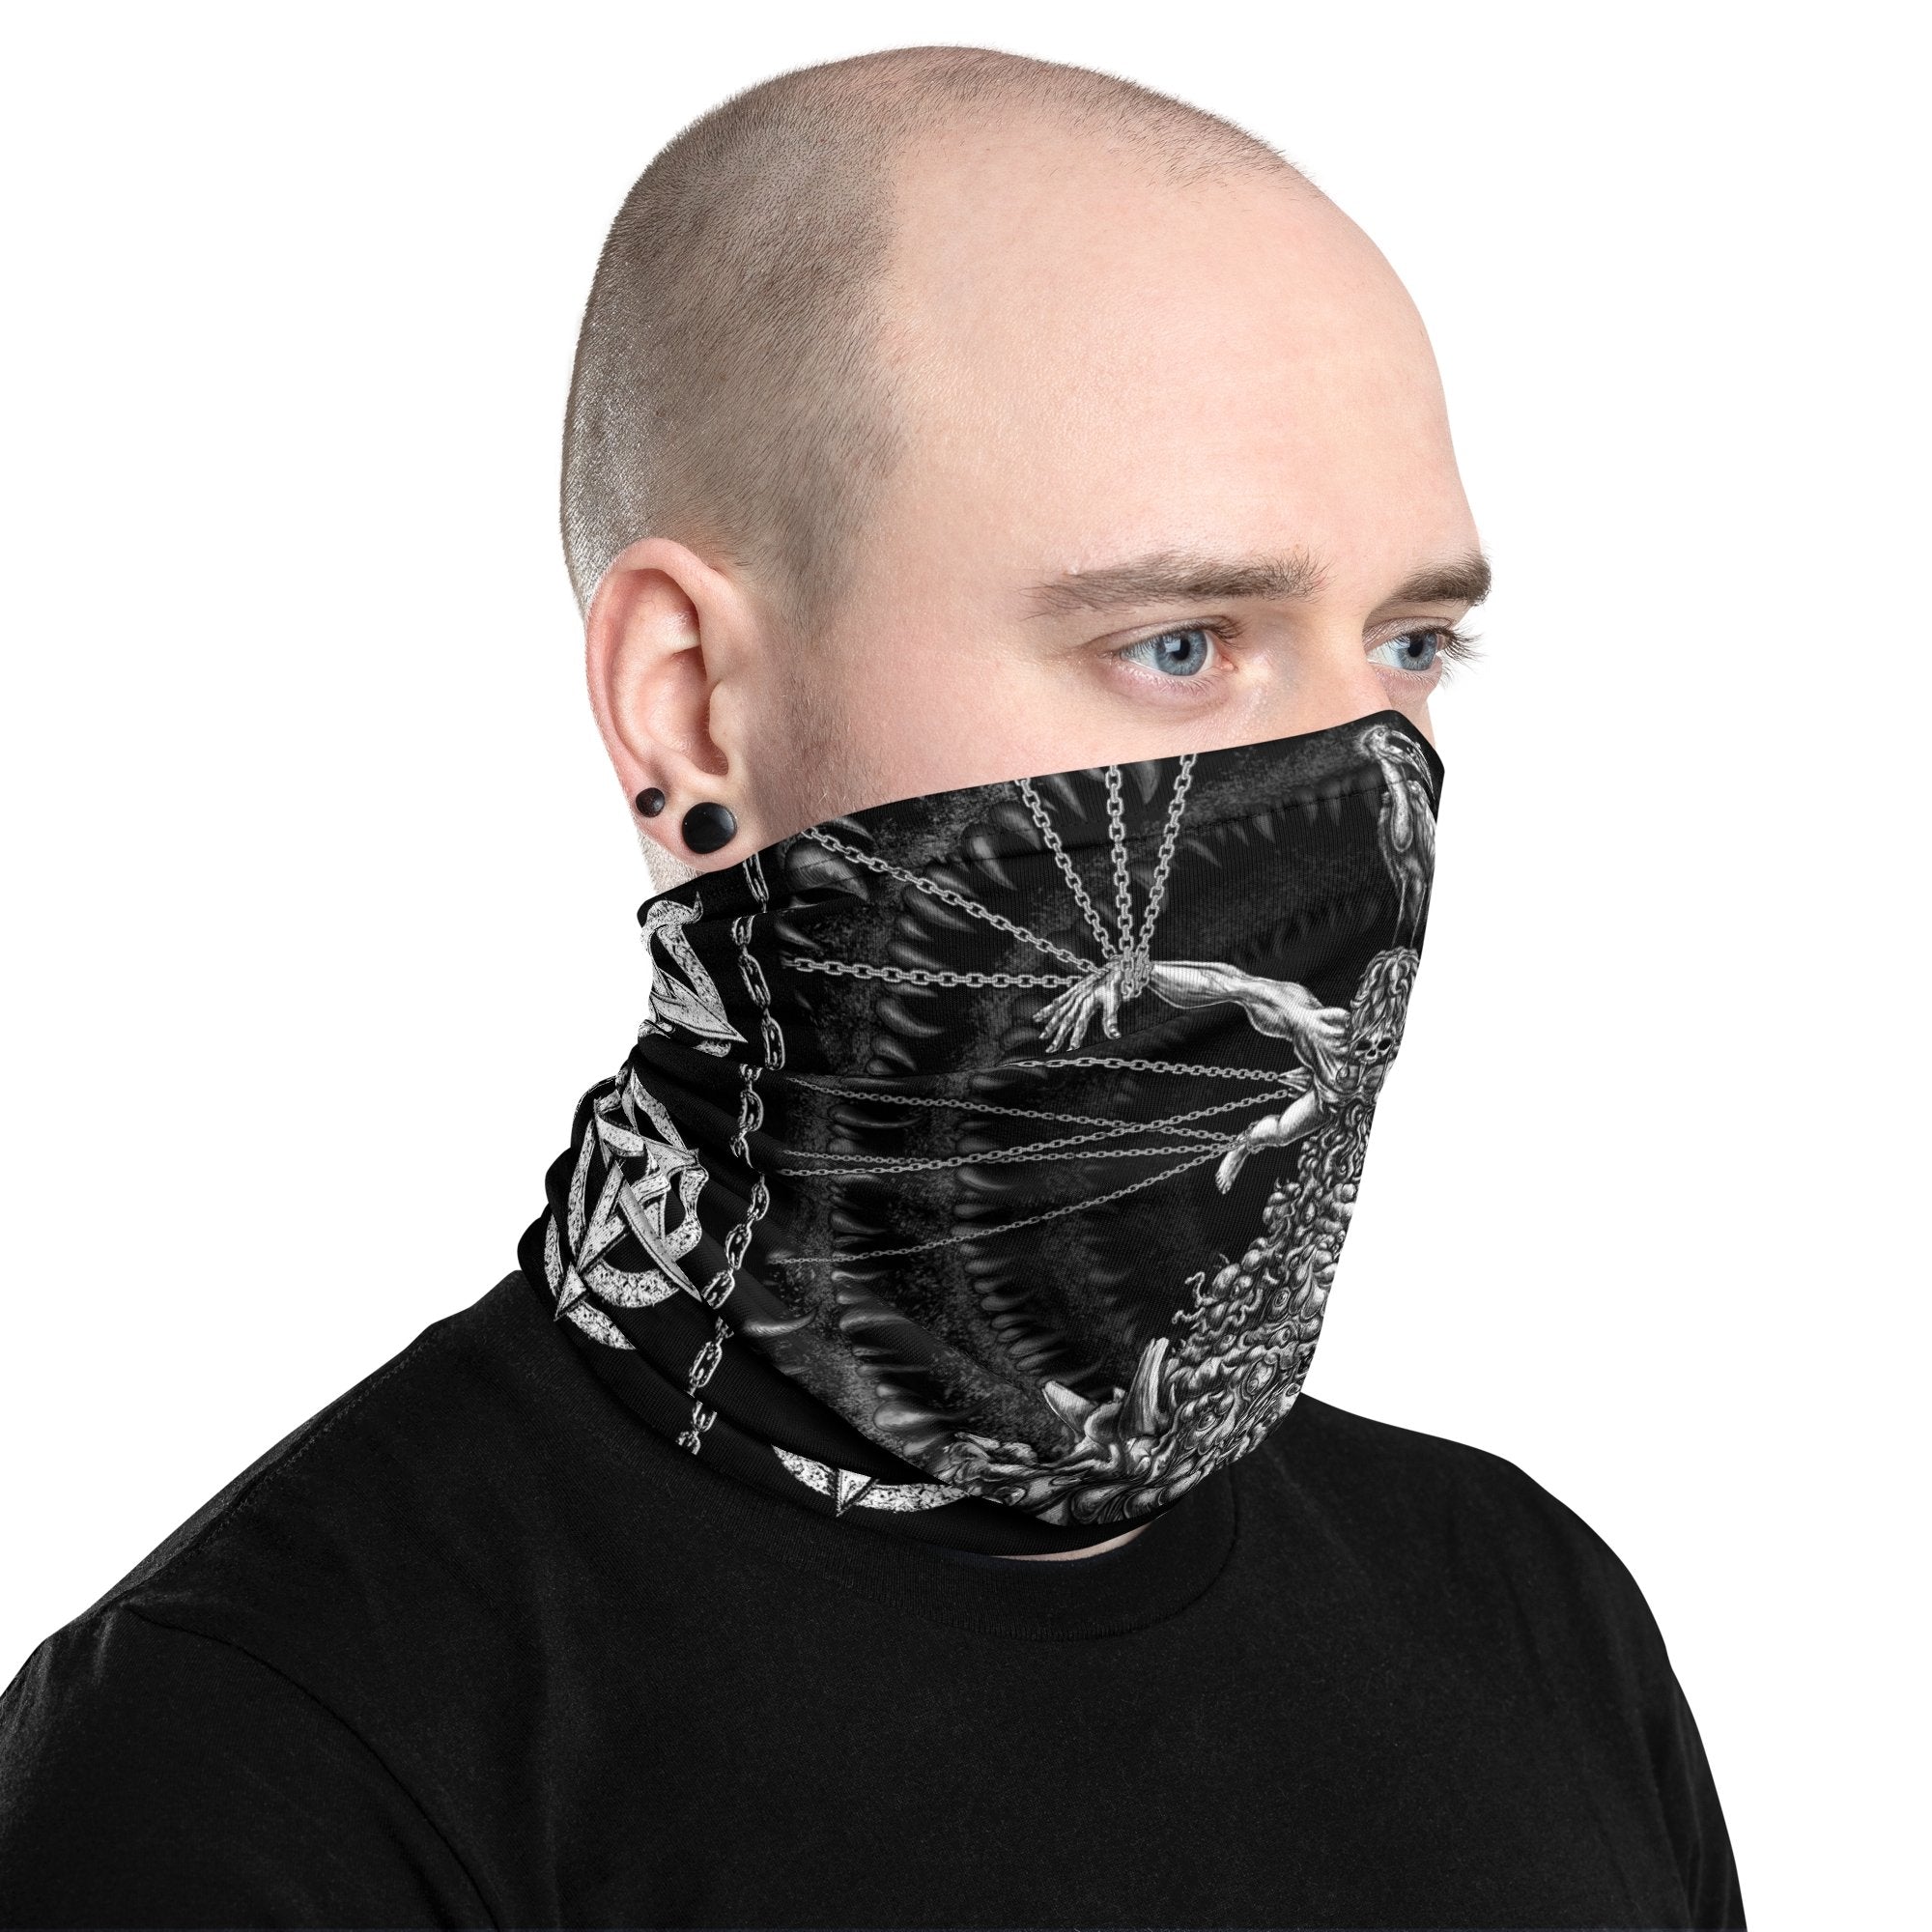 Horror Neck Gaiter, Face Mask, Head Covering, Gothic Hell, Street Outfit - Purging - Abysm Internal